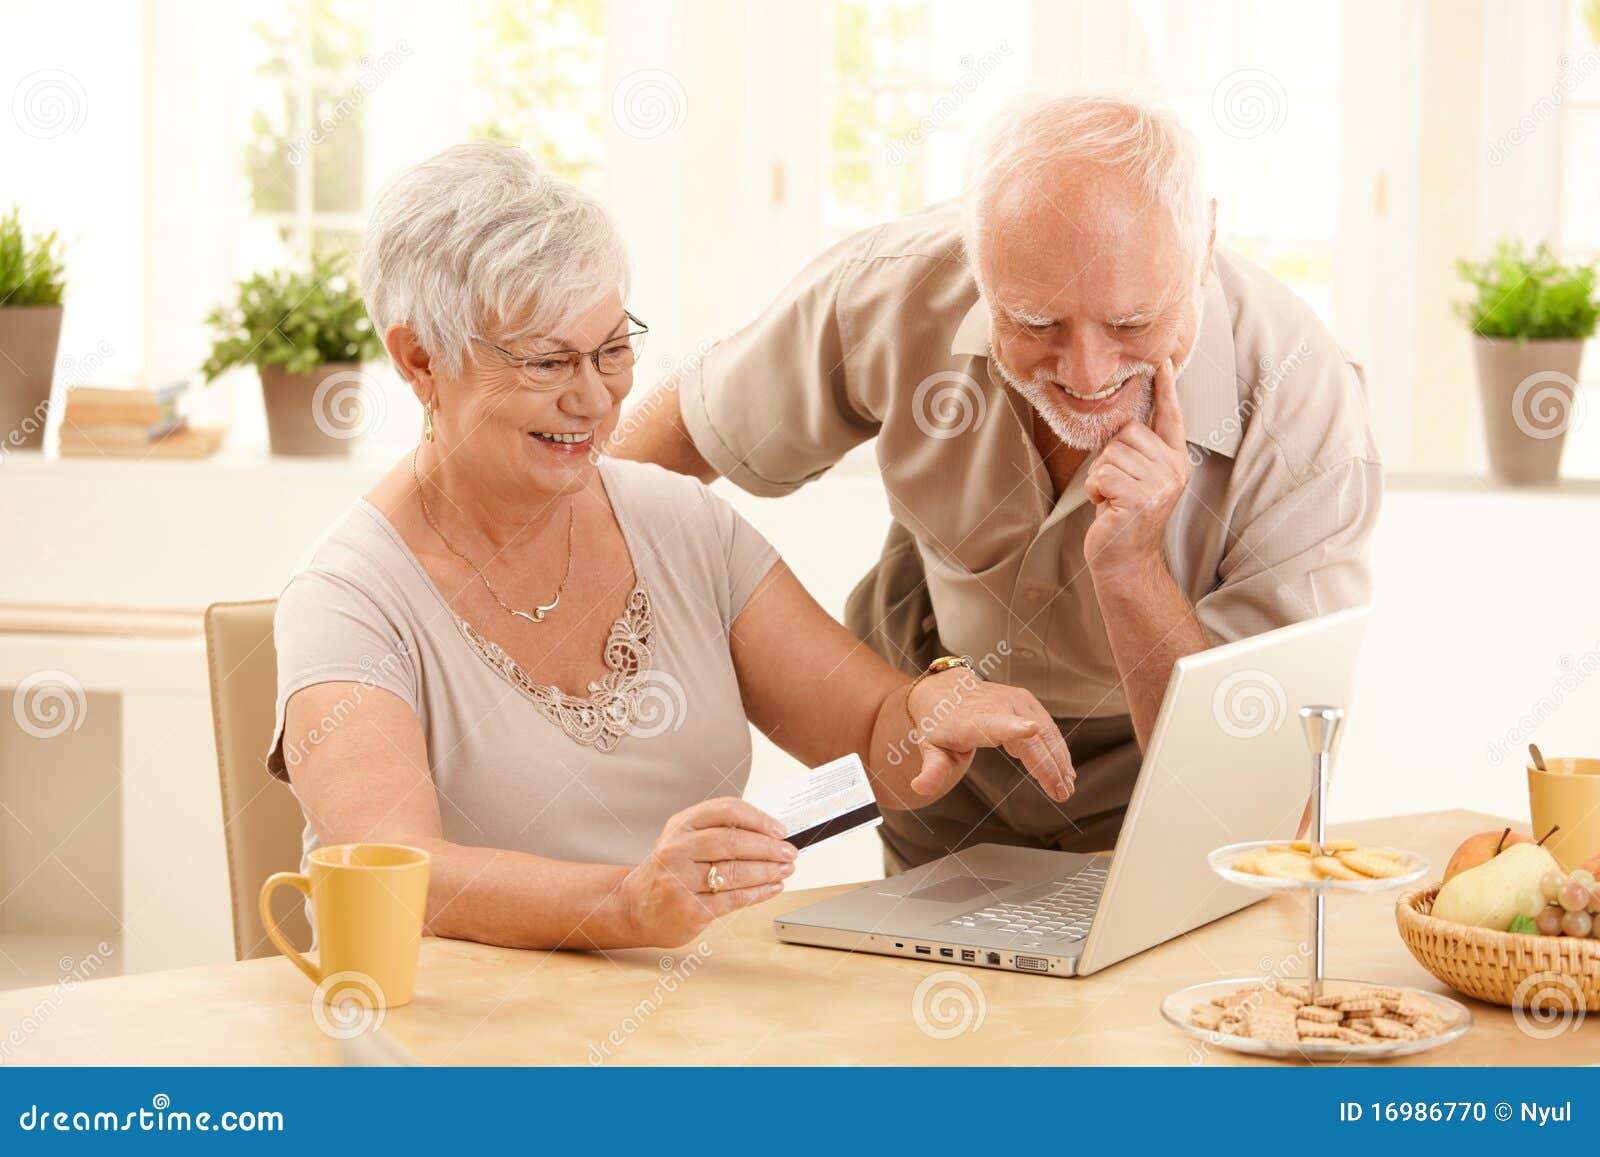 happy older couple doing online shopping